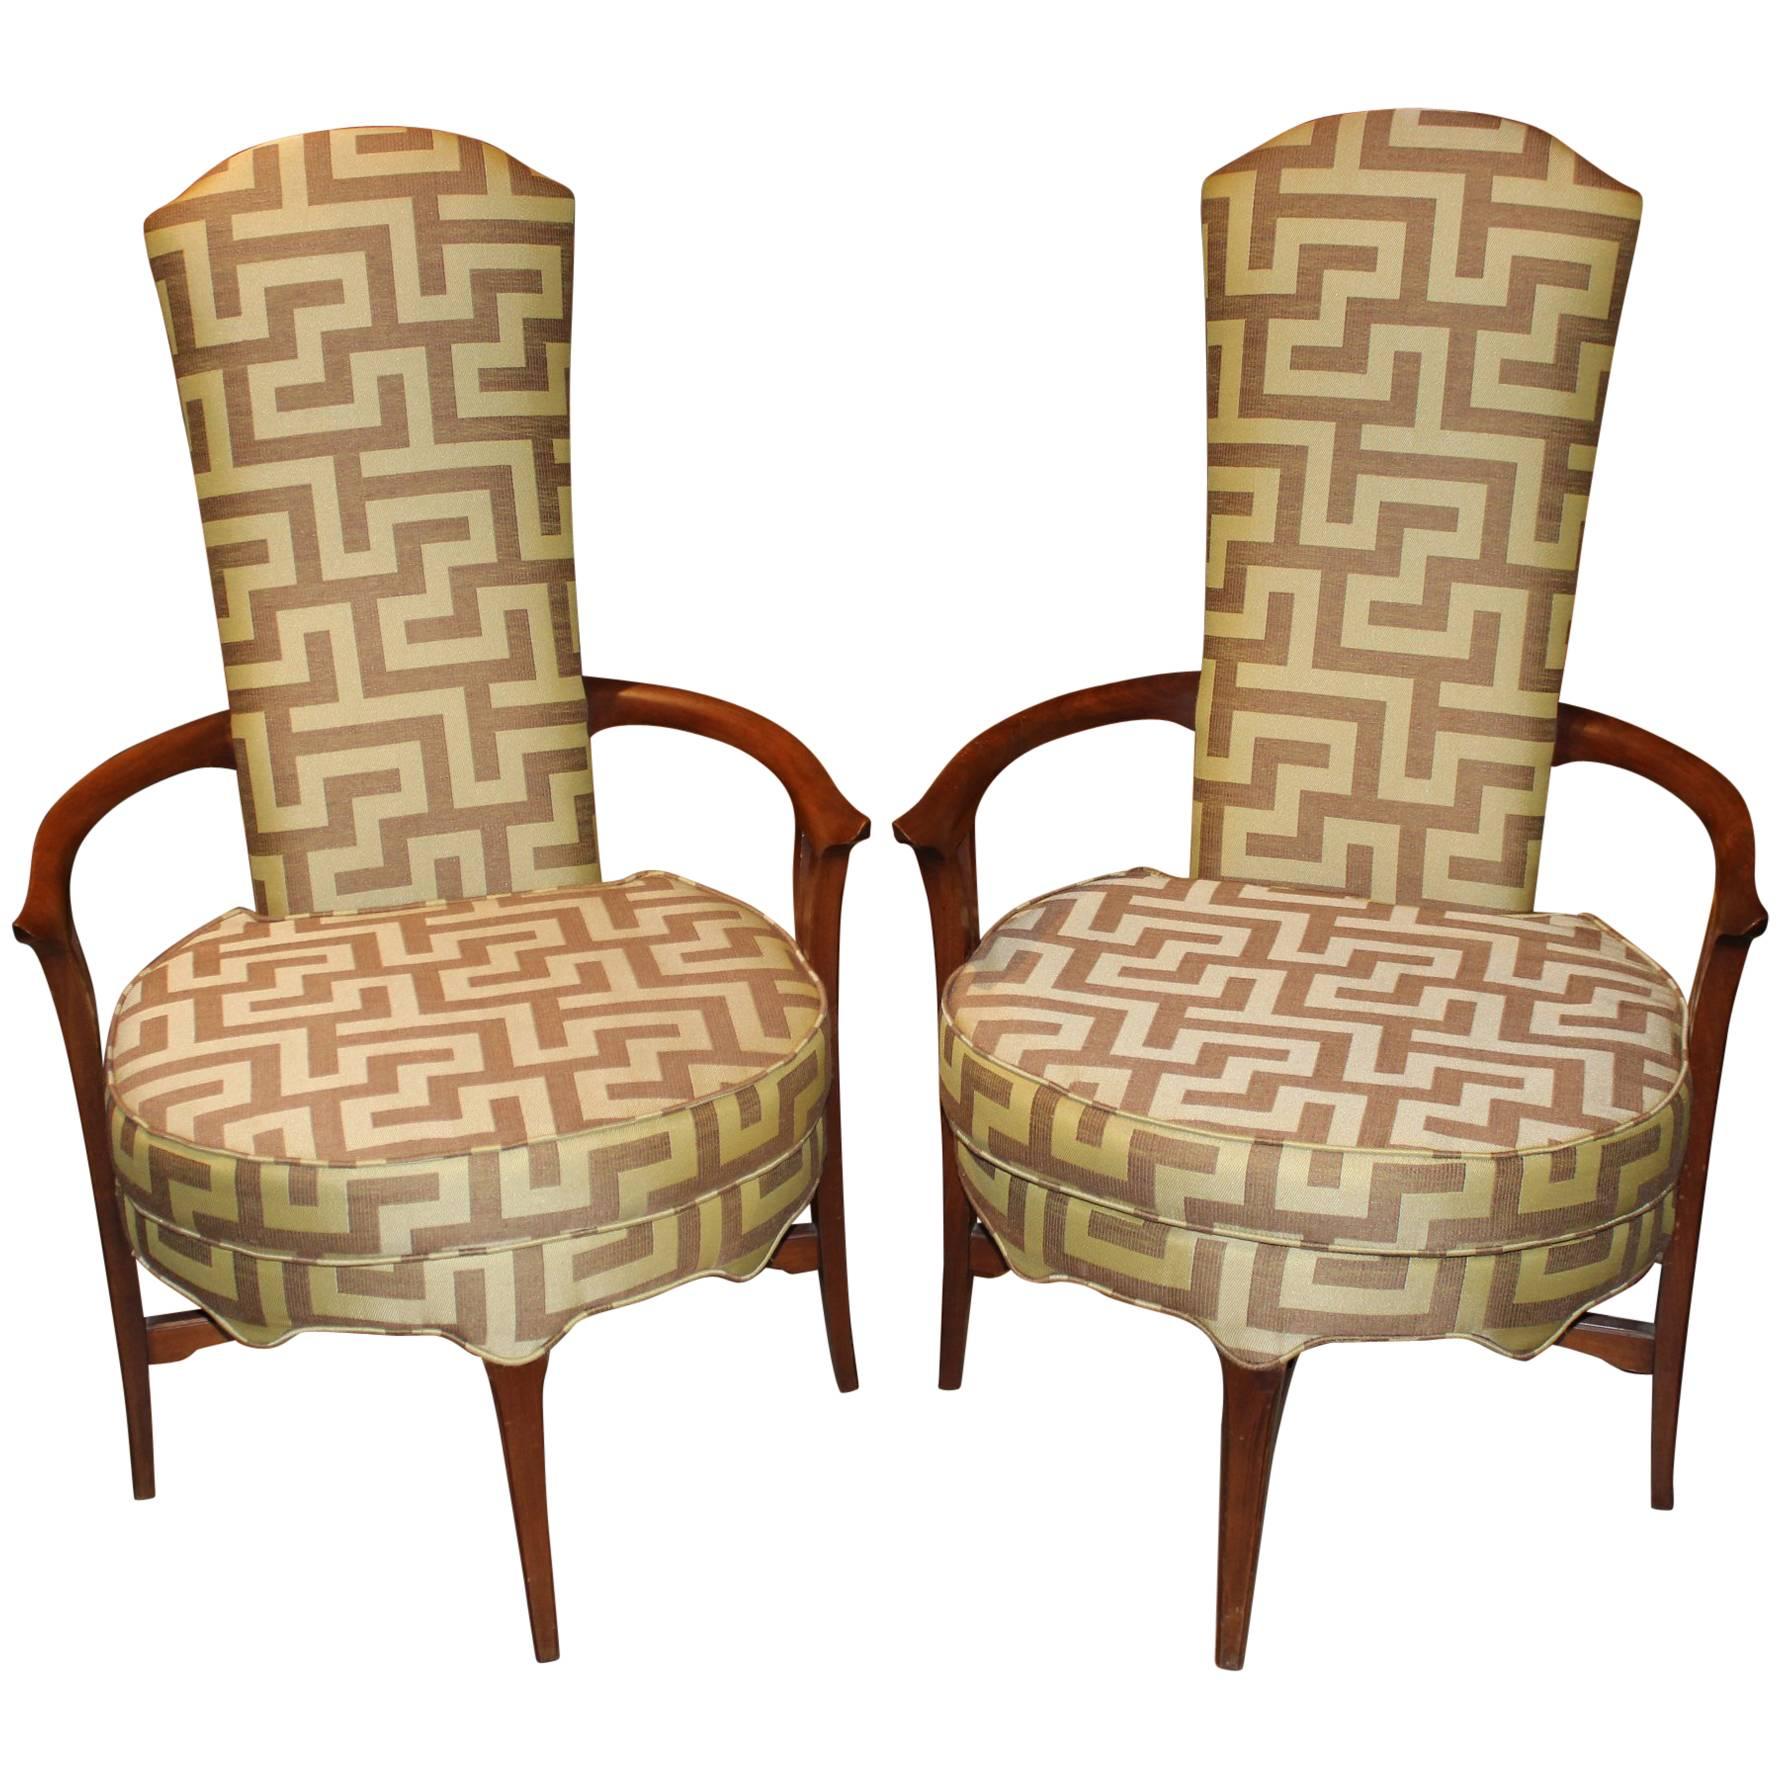 Pair of Danish Mid-Century Modern High Back Round Upholstered Armchairs